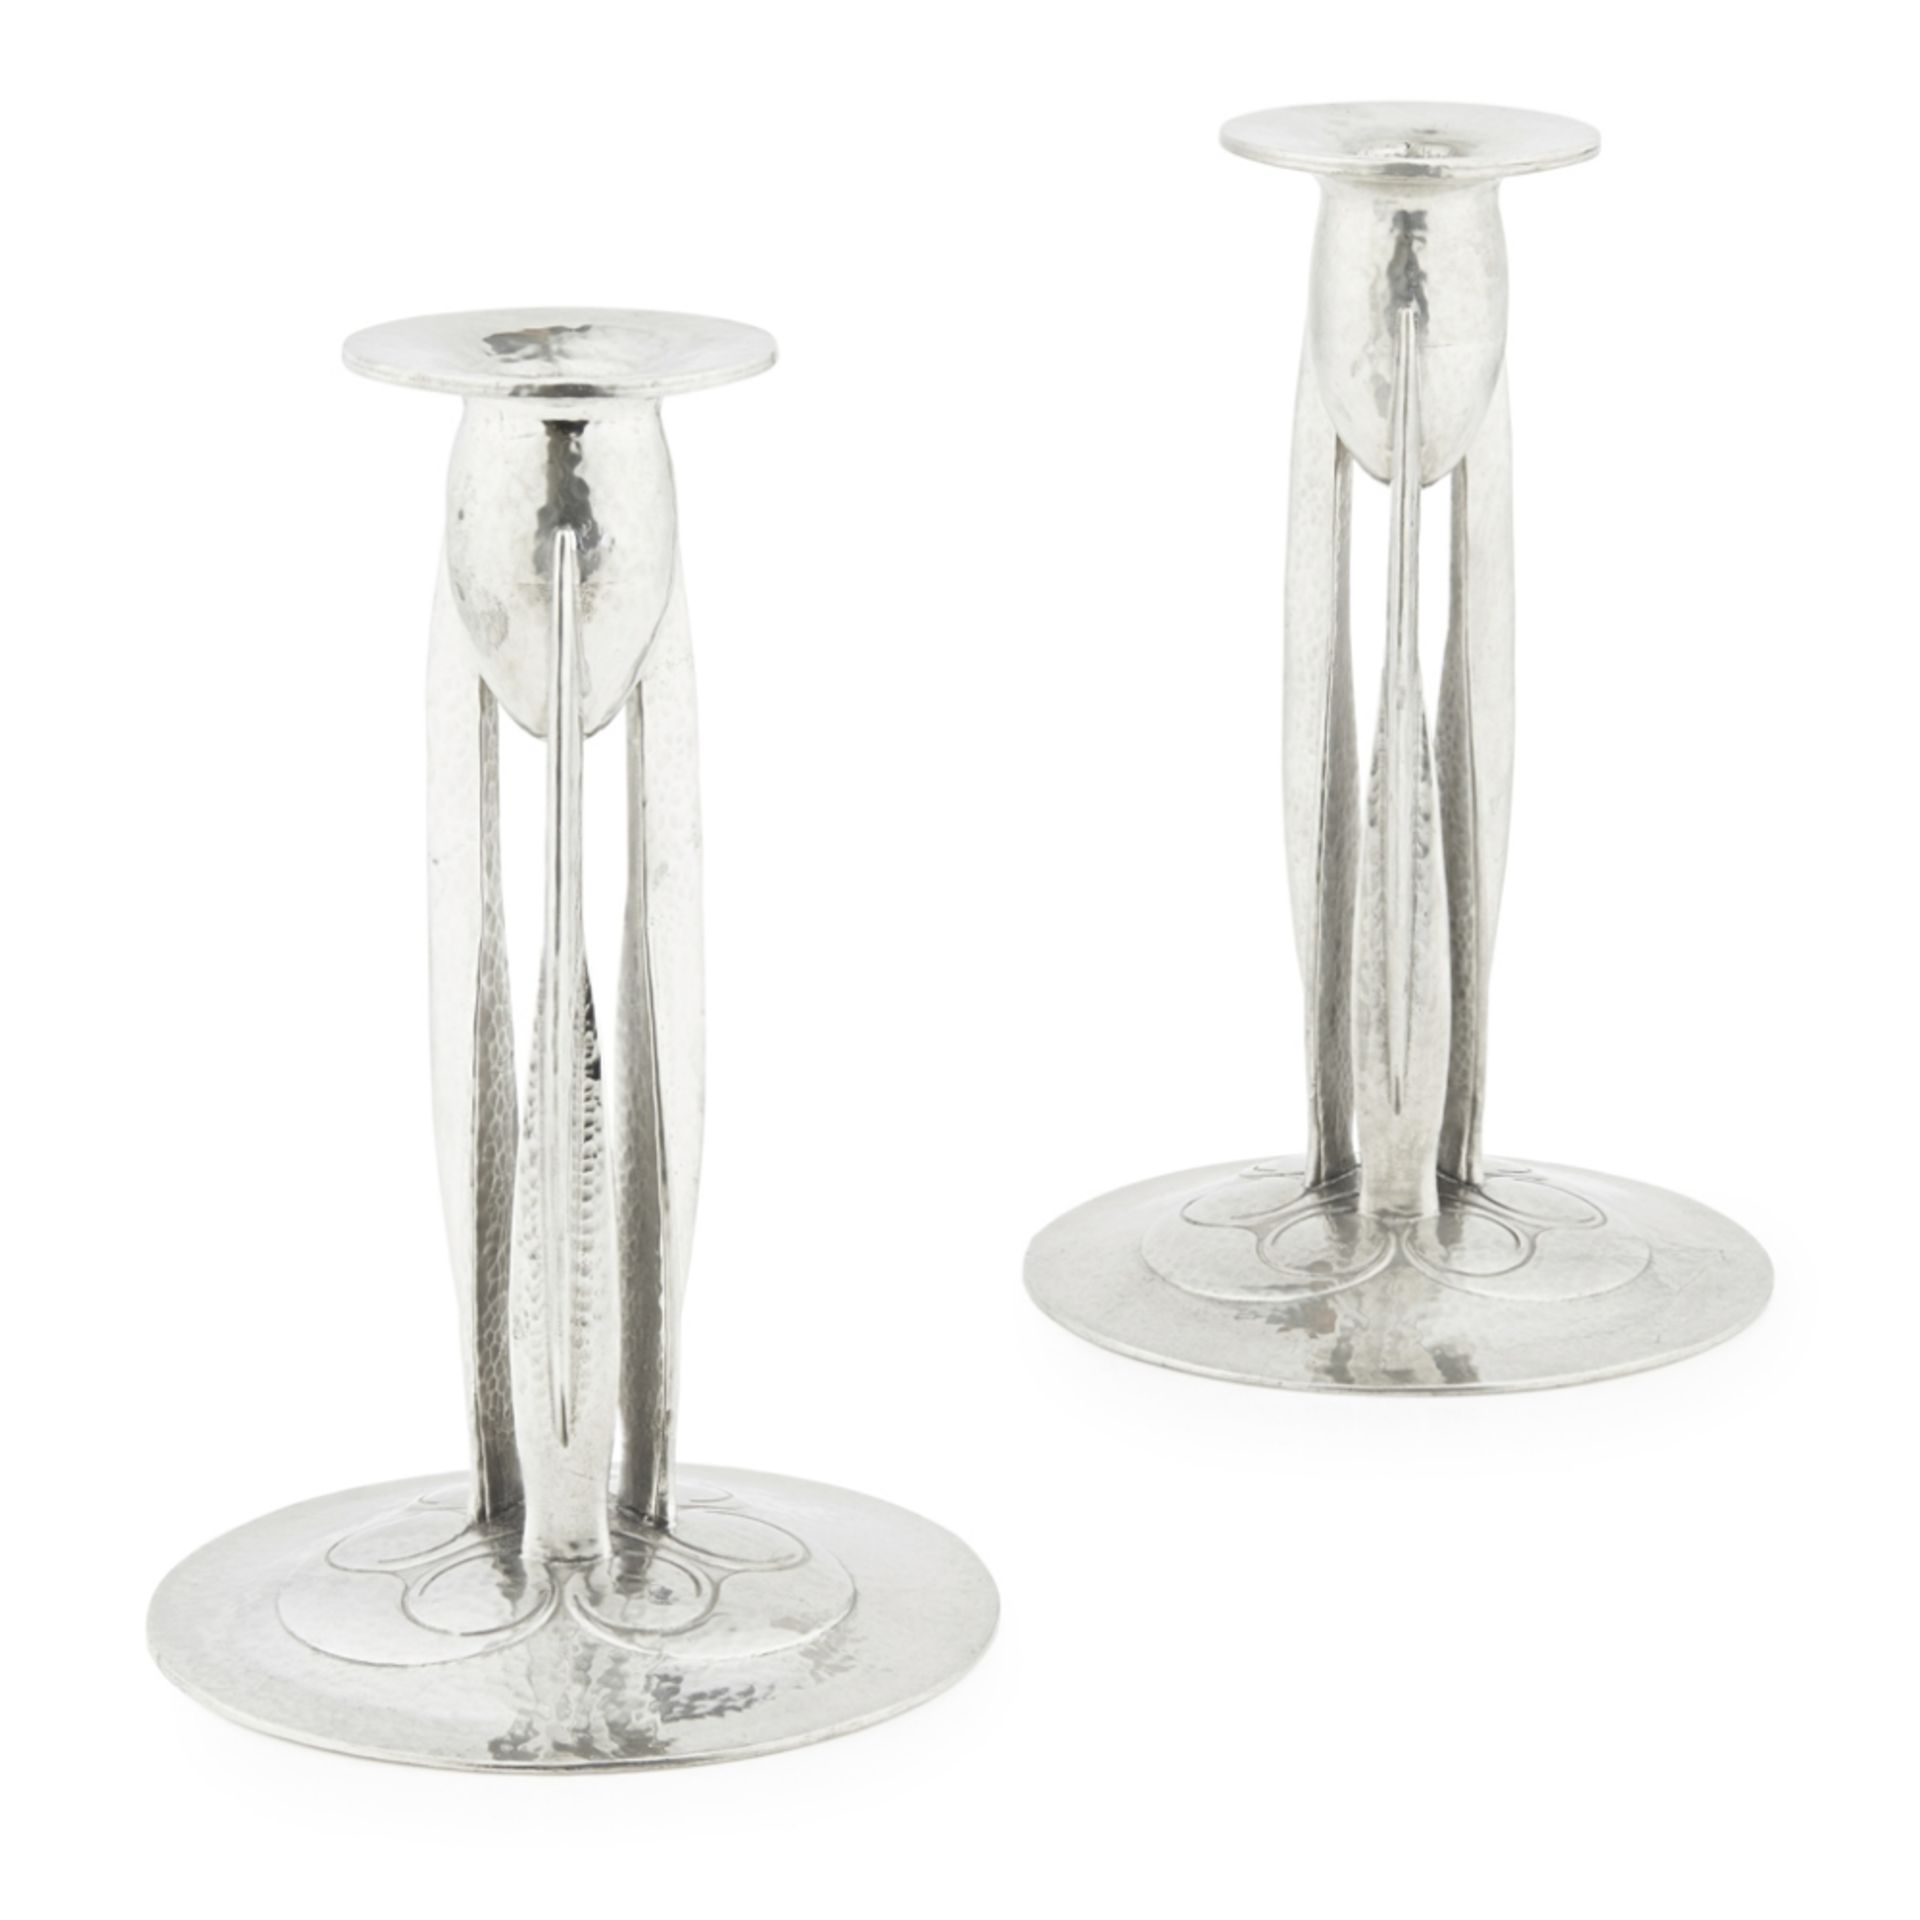 ARCHIBALD KNOX (1864-1933) FOR LIBERTY & CO., LONDON PAIR OF 'TUDRIC' PEWTER CANDLESTICKS, CIRCA